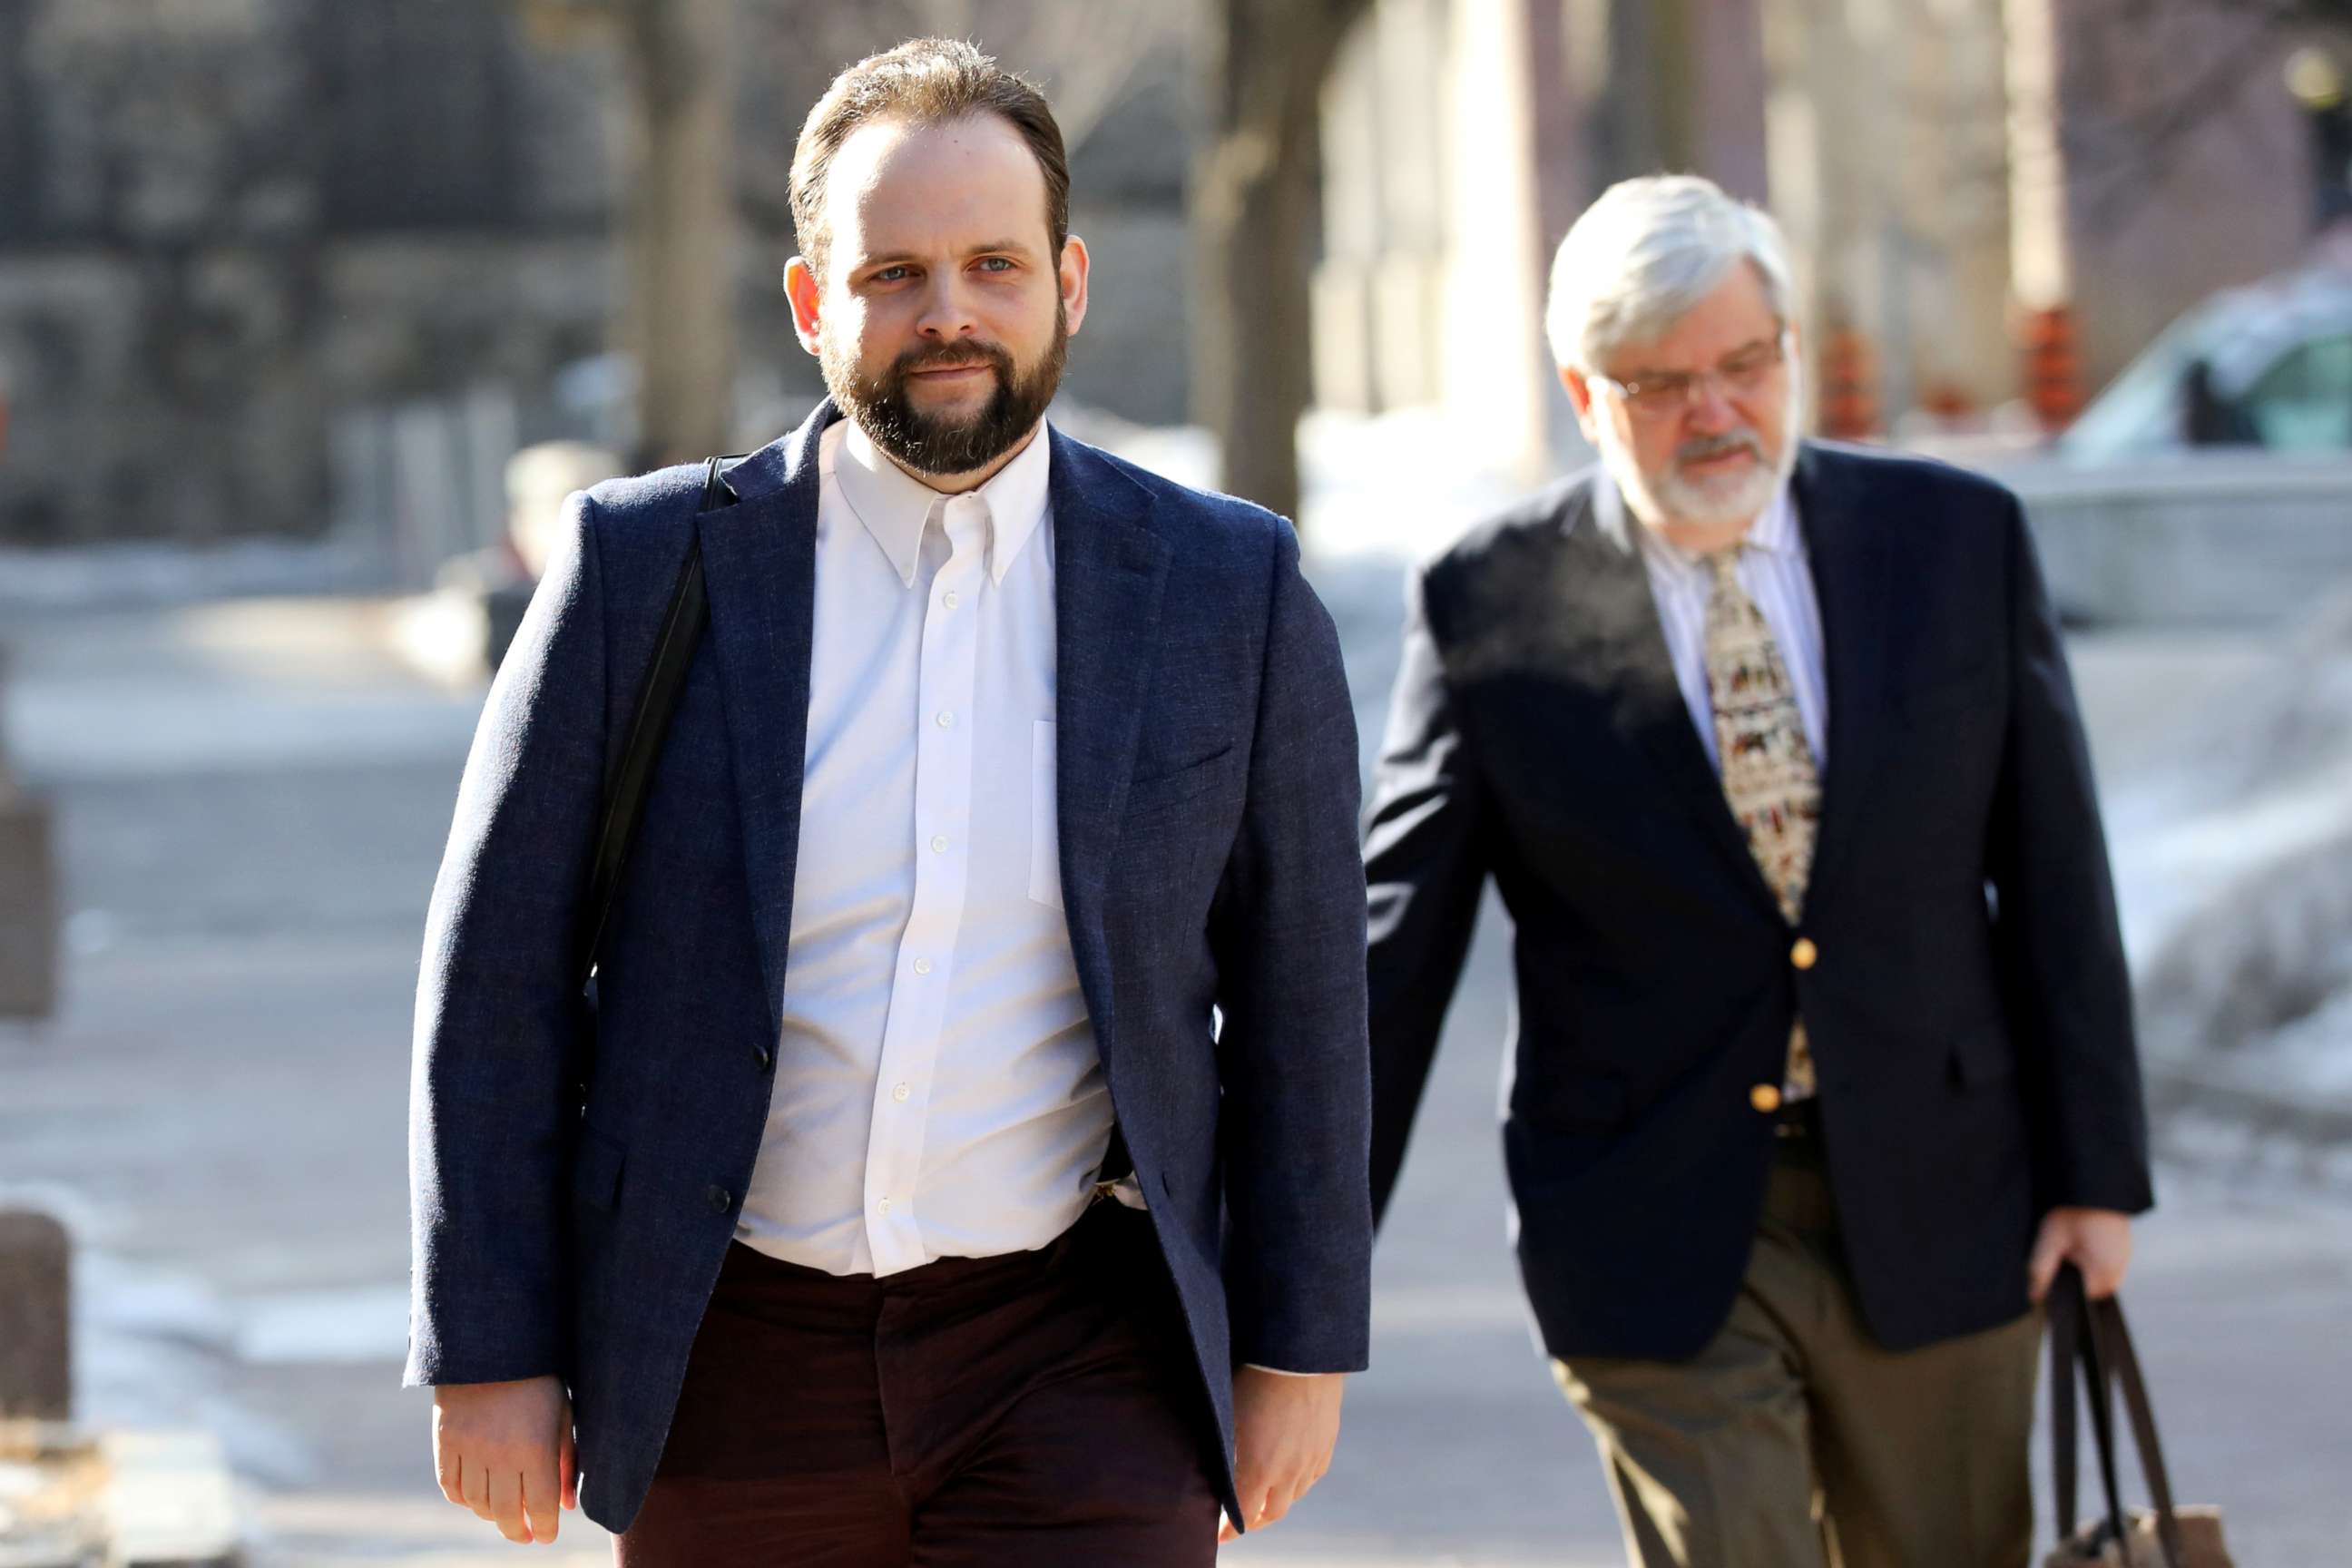 PHOTO: Former Taliban hostage Joshua Boyle, who is facing criminal charges in Canada related to incidents after his release from captivity, arrives at the courthouse in Ottawa, Ontario, Canada, March 27, 2019.